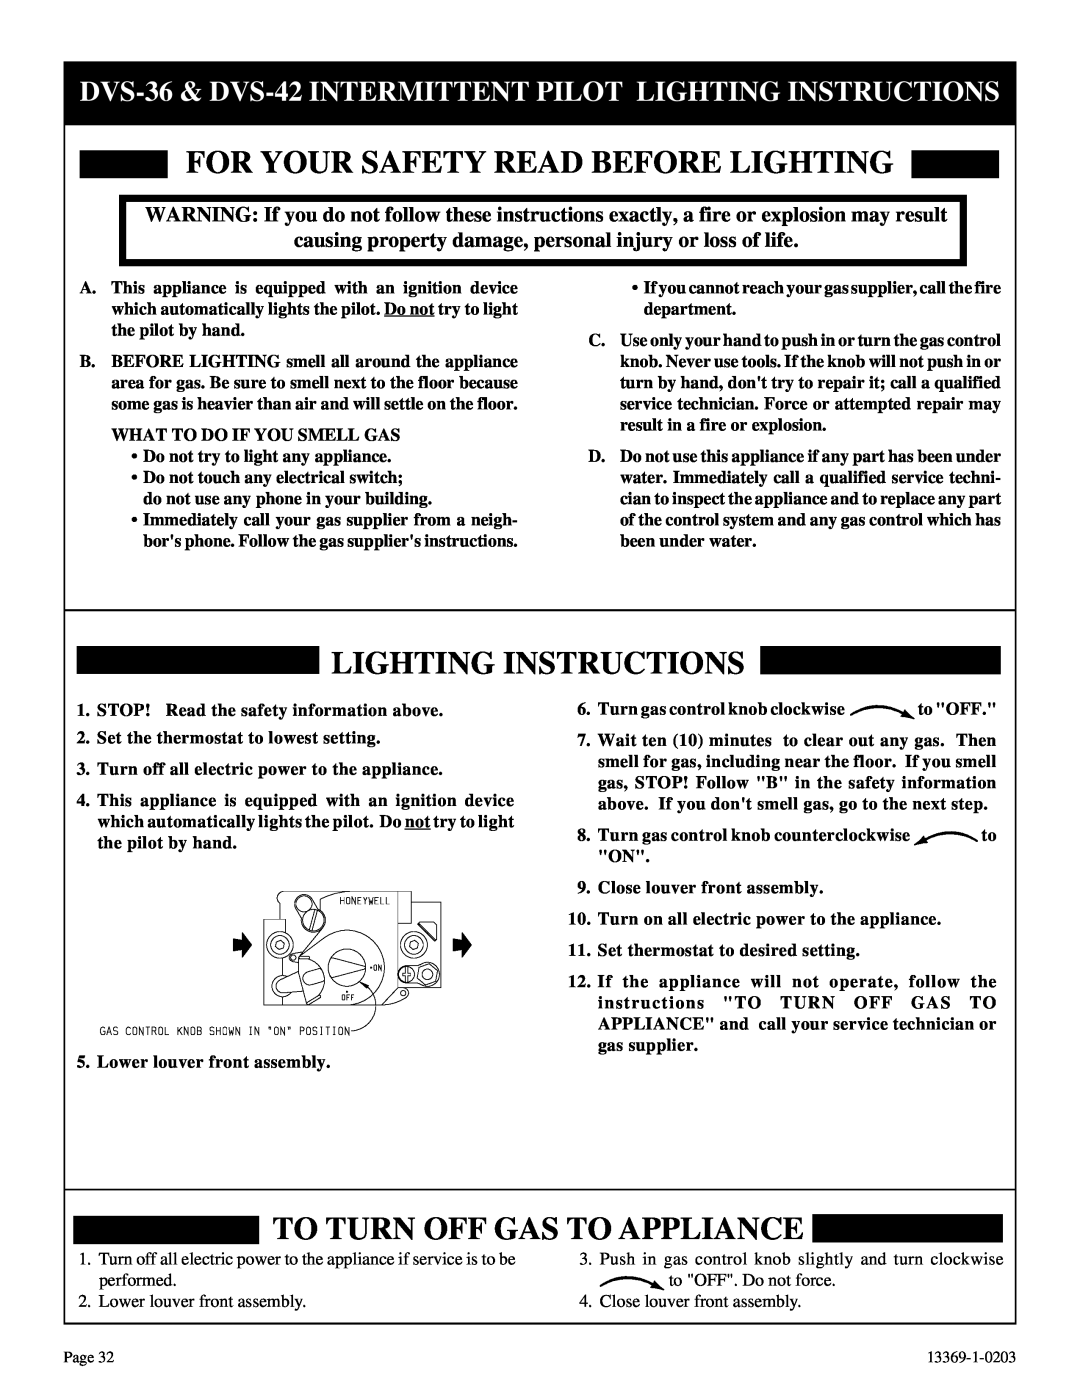 DVS 30-2 To Turn Off Gas To Appliance, For Your Safety Read Before Lighting, Lighting Instructions 